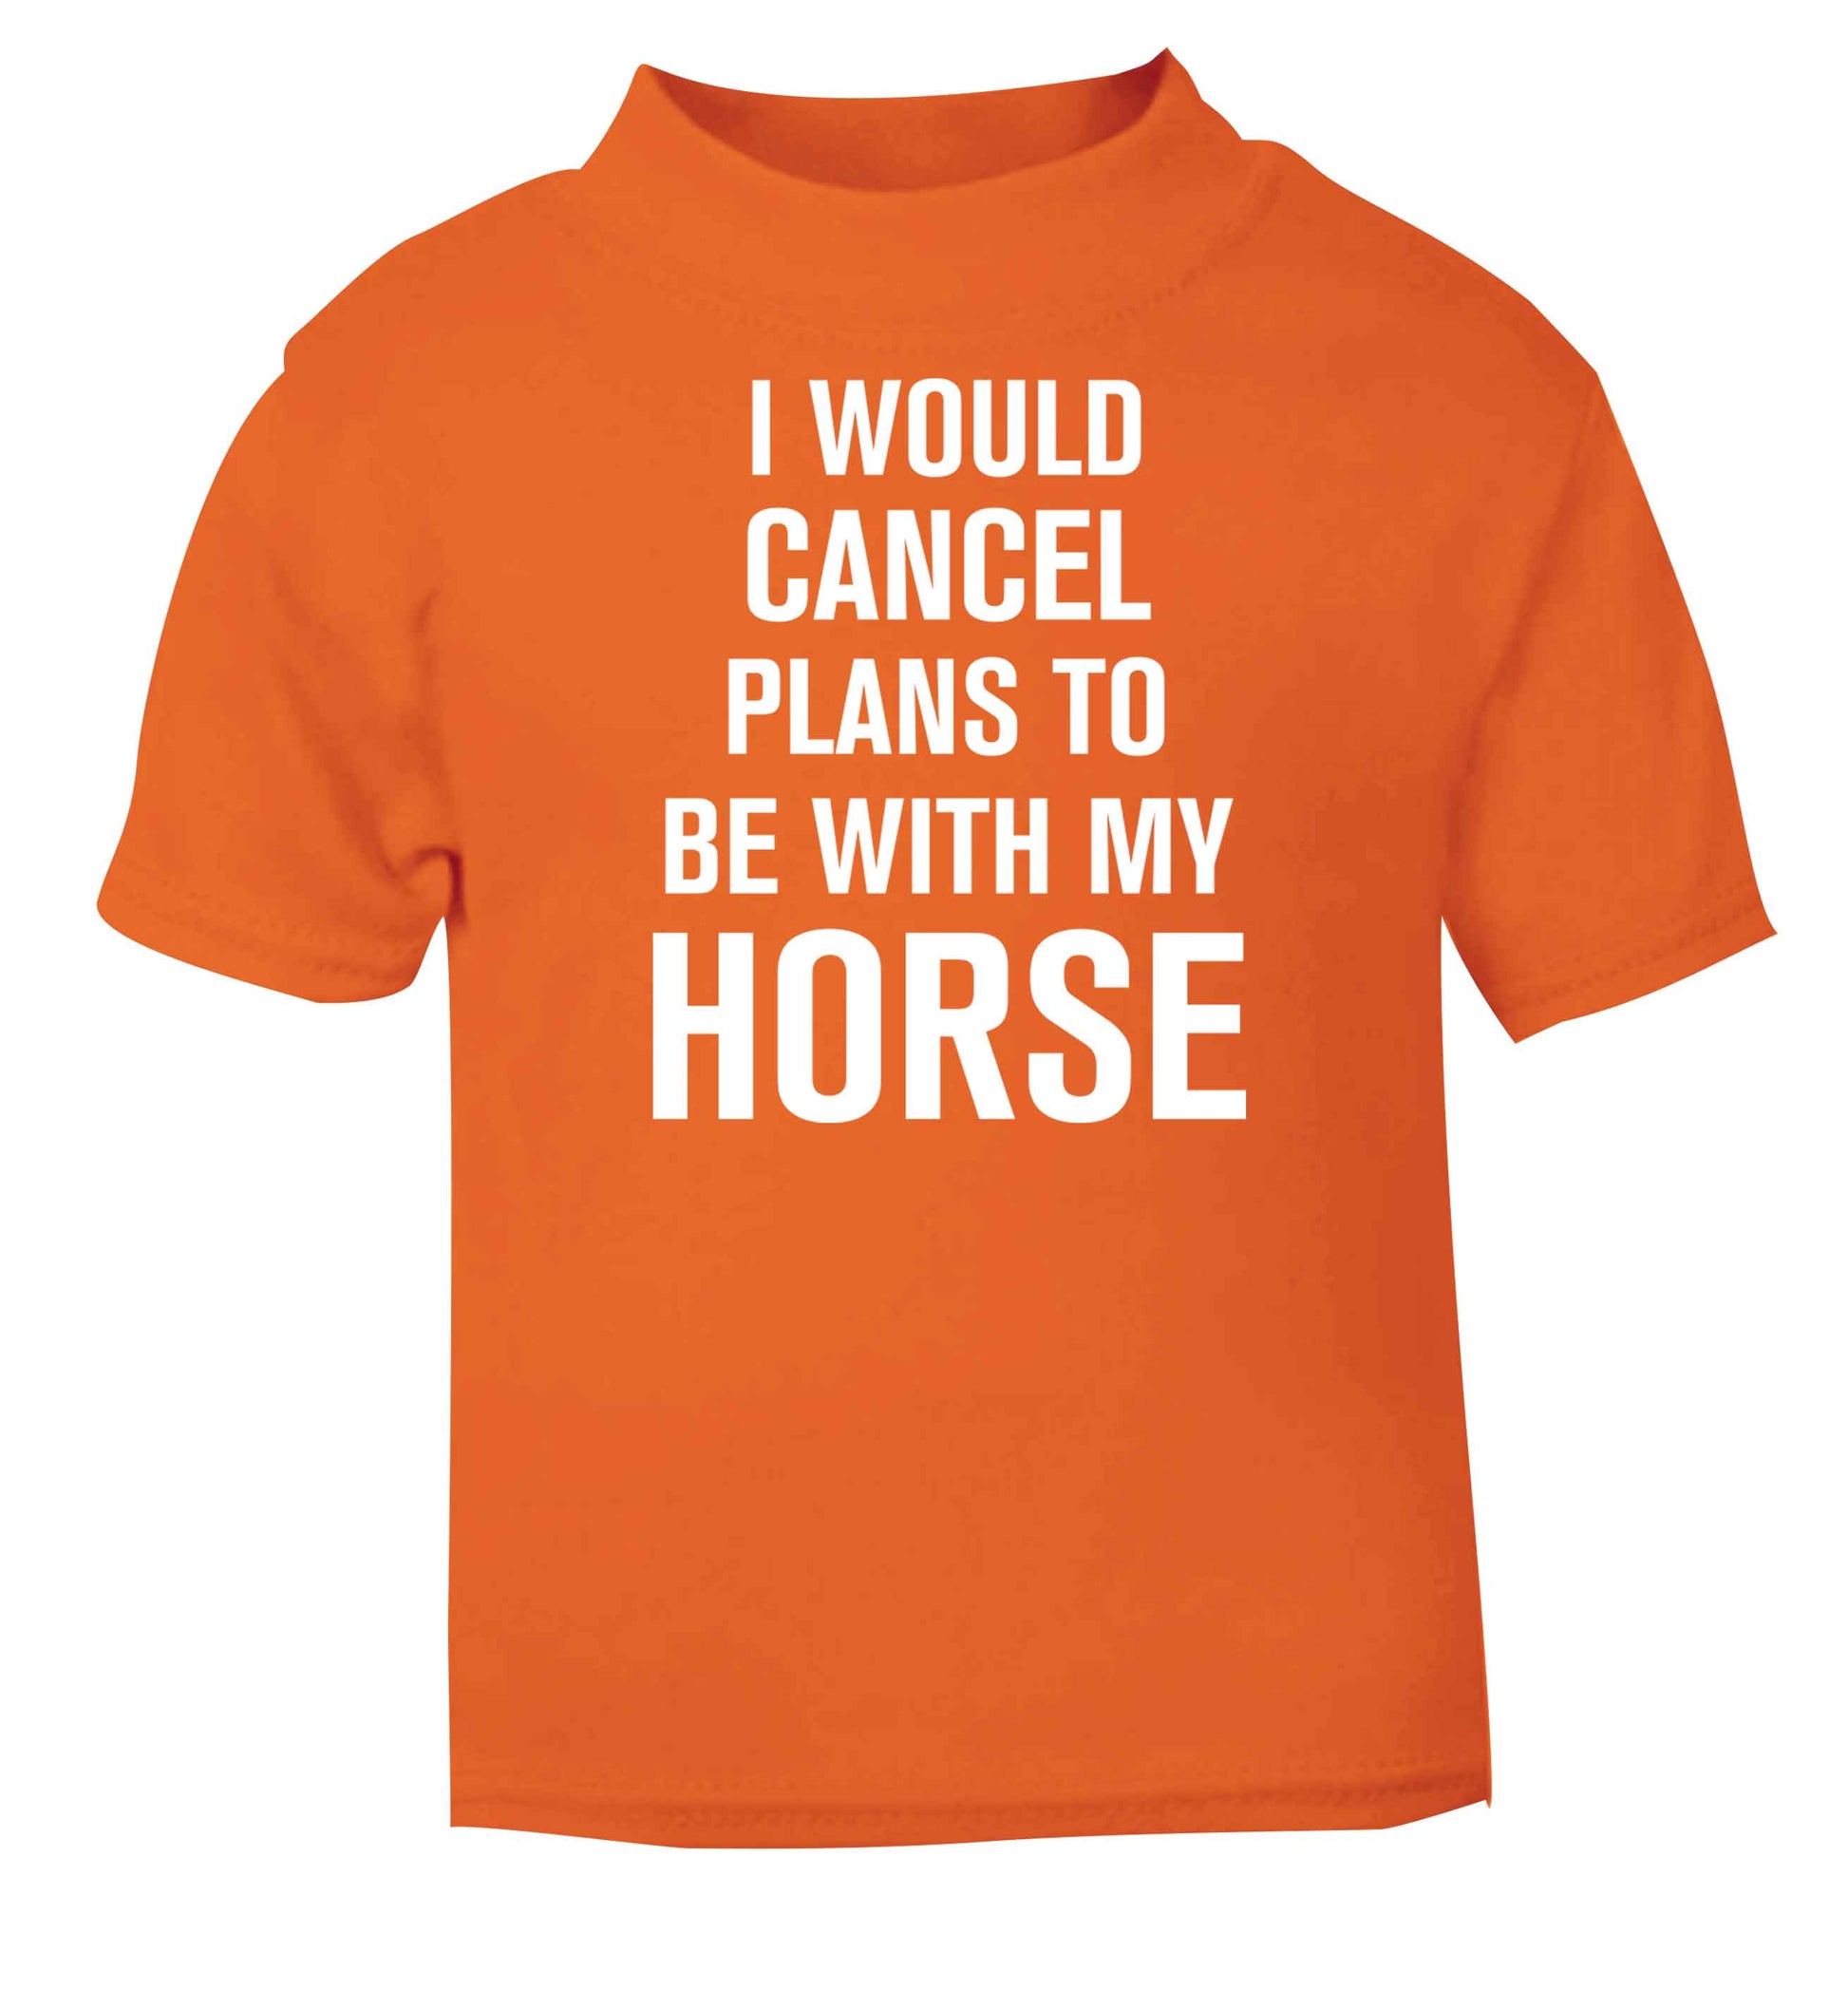 I will cancel plans to be with my horse orange baby toddler Tshirt 2 Years